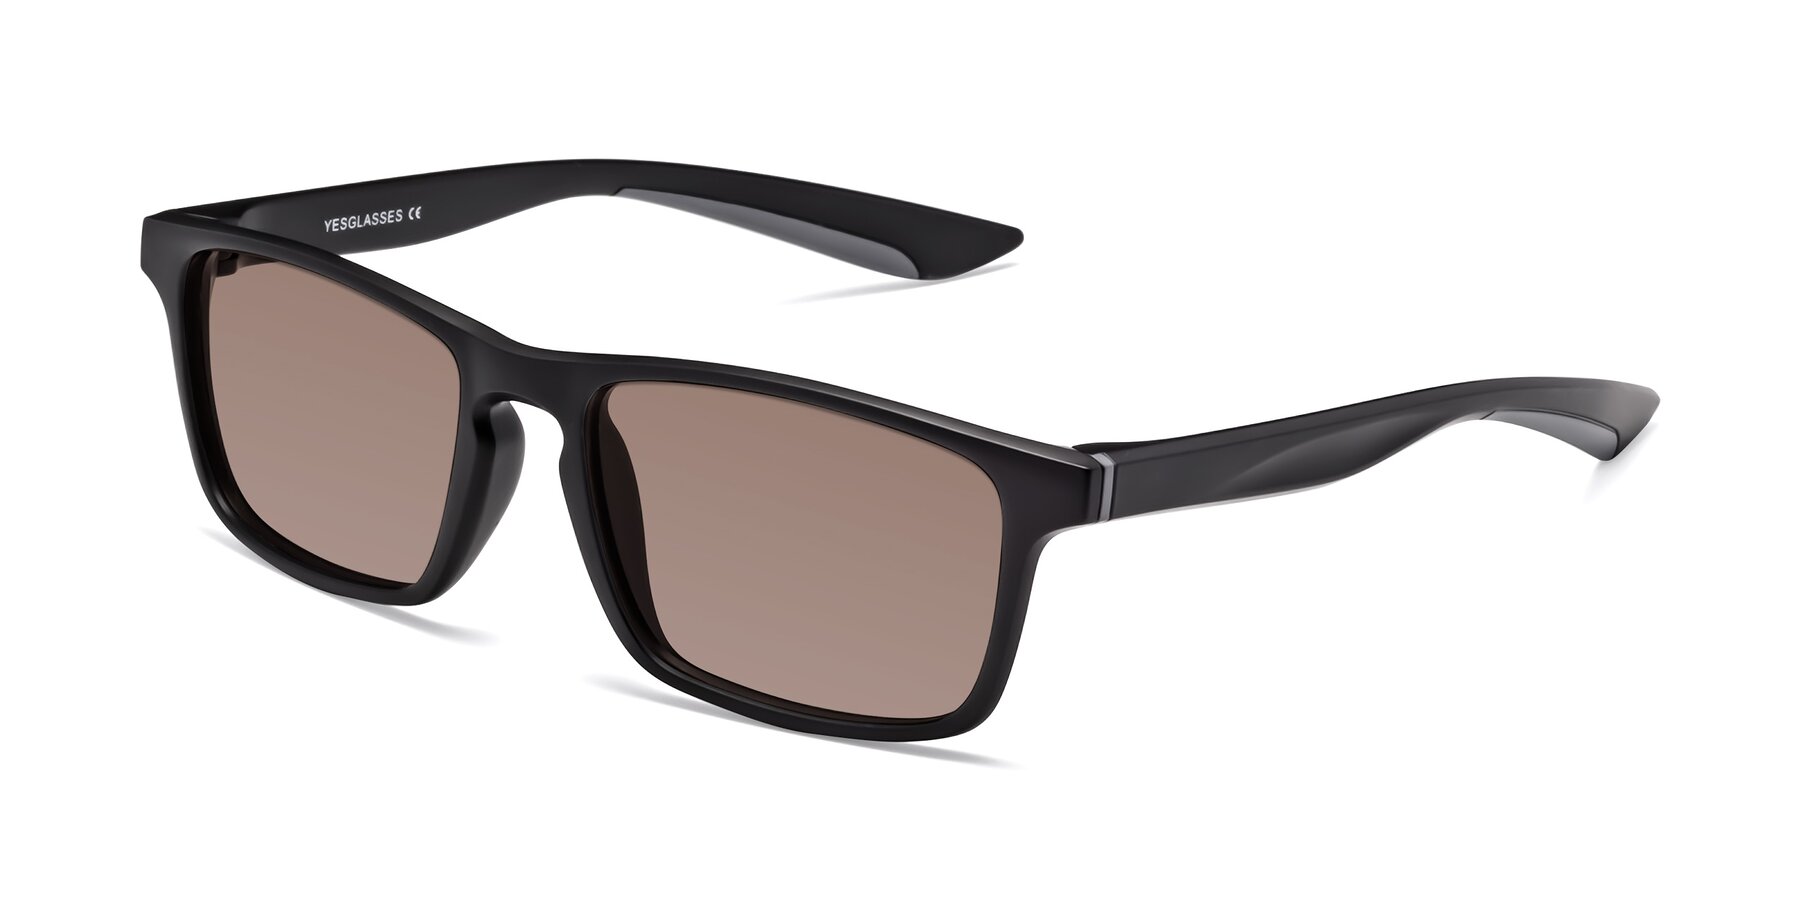 Angle of Passion in Matte Black-Gray with Medium Brown Tinted Lenses